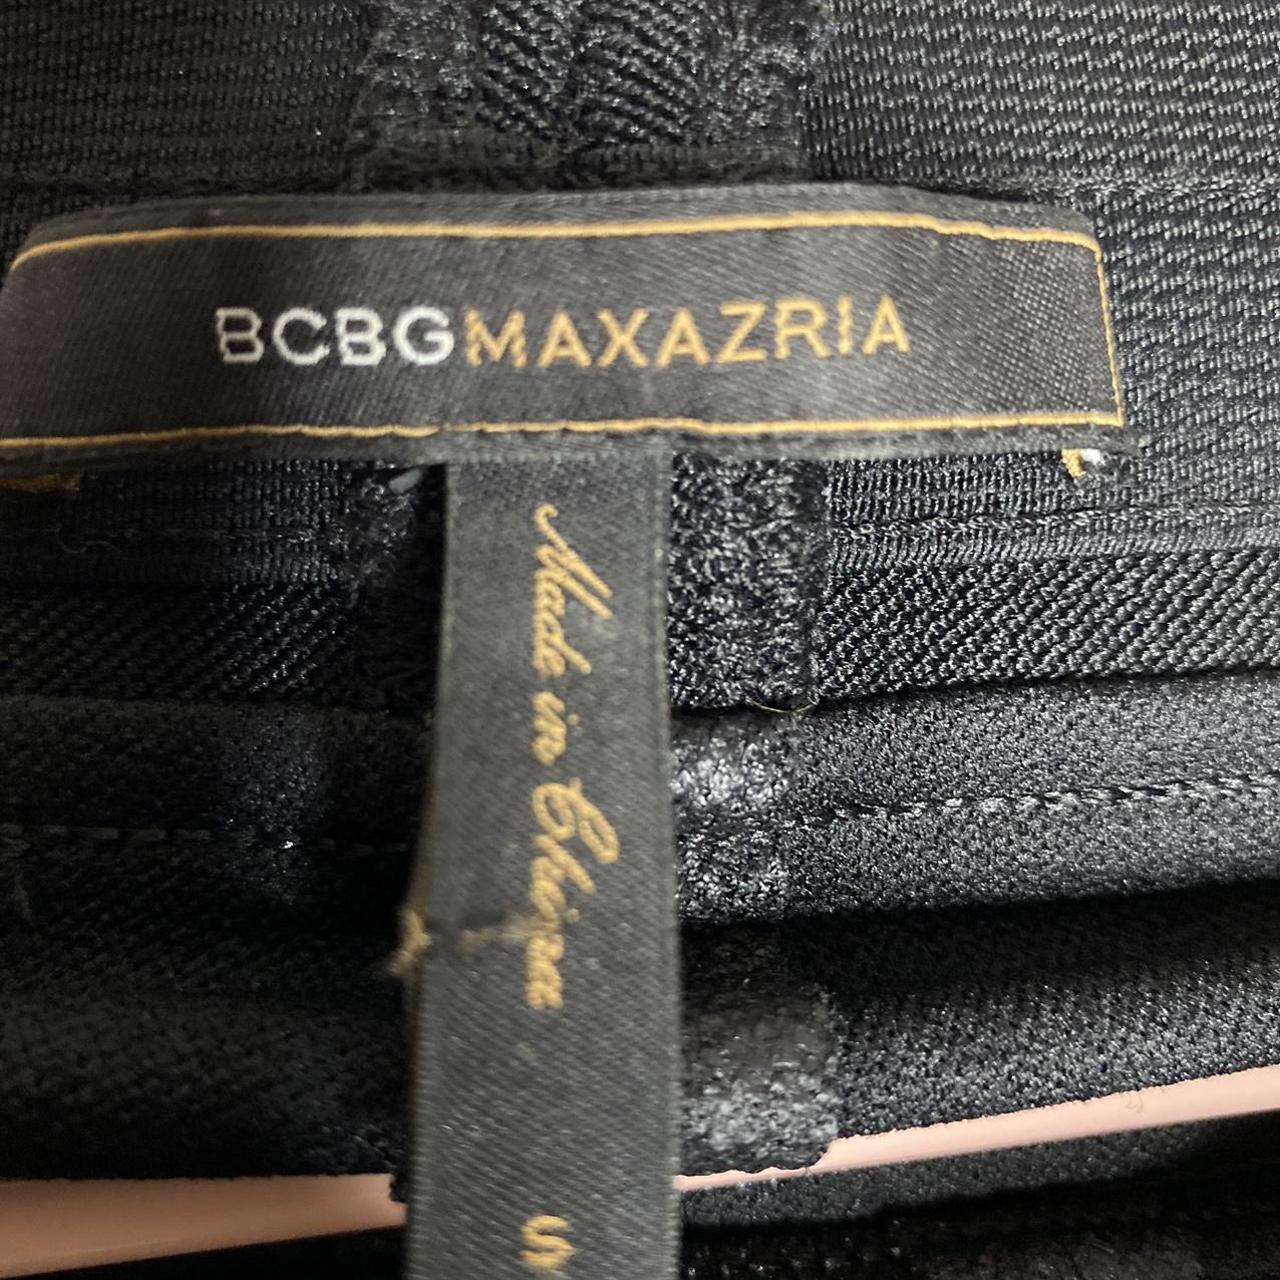 BCBGMAXAZRIA Leggings For comfort and style look no - Depop